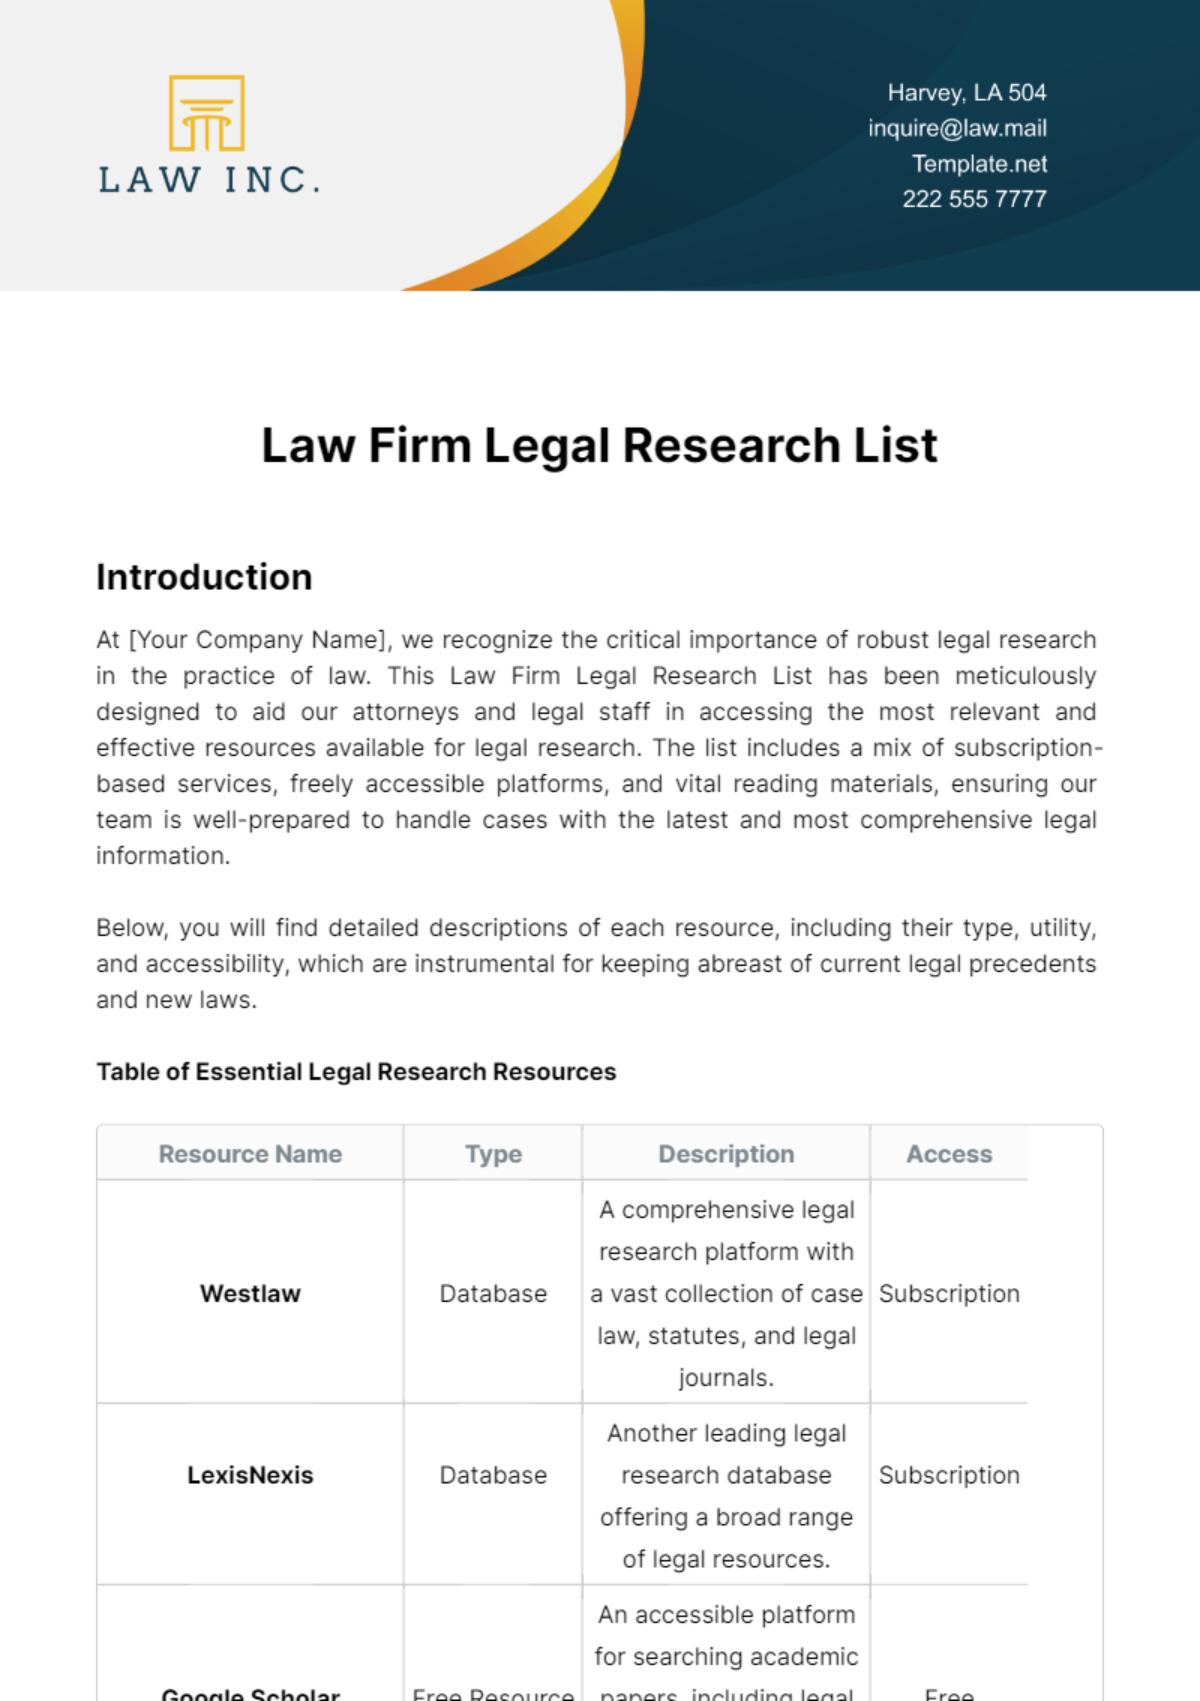 Law Firm Legal Research List Template